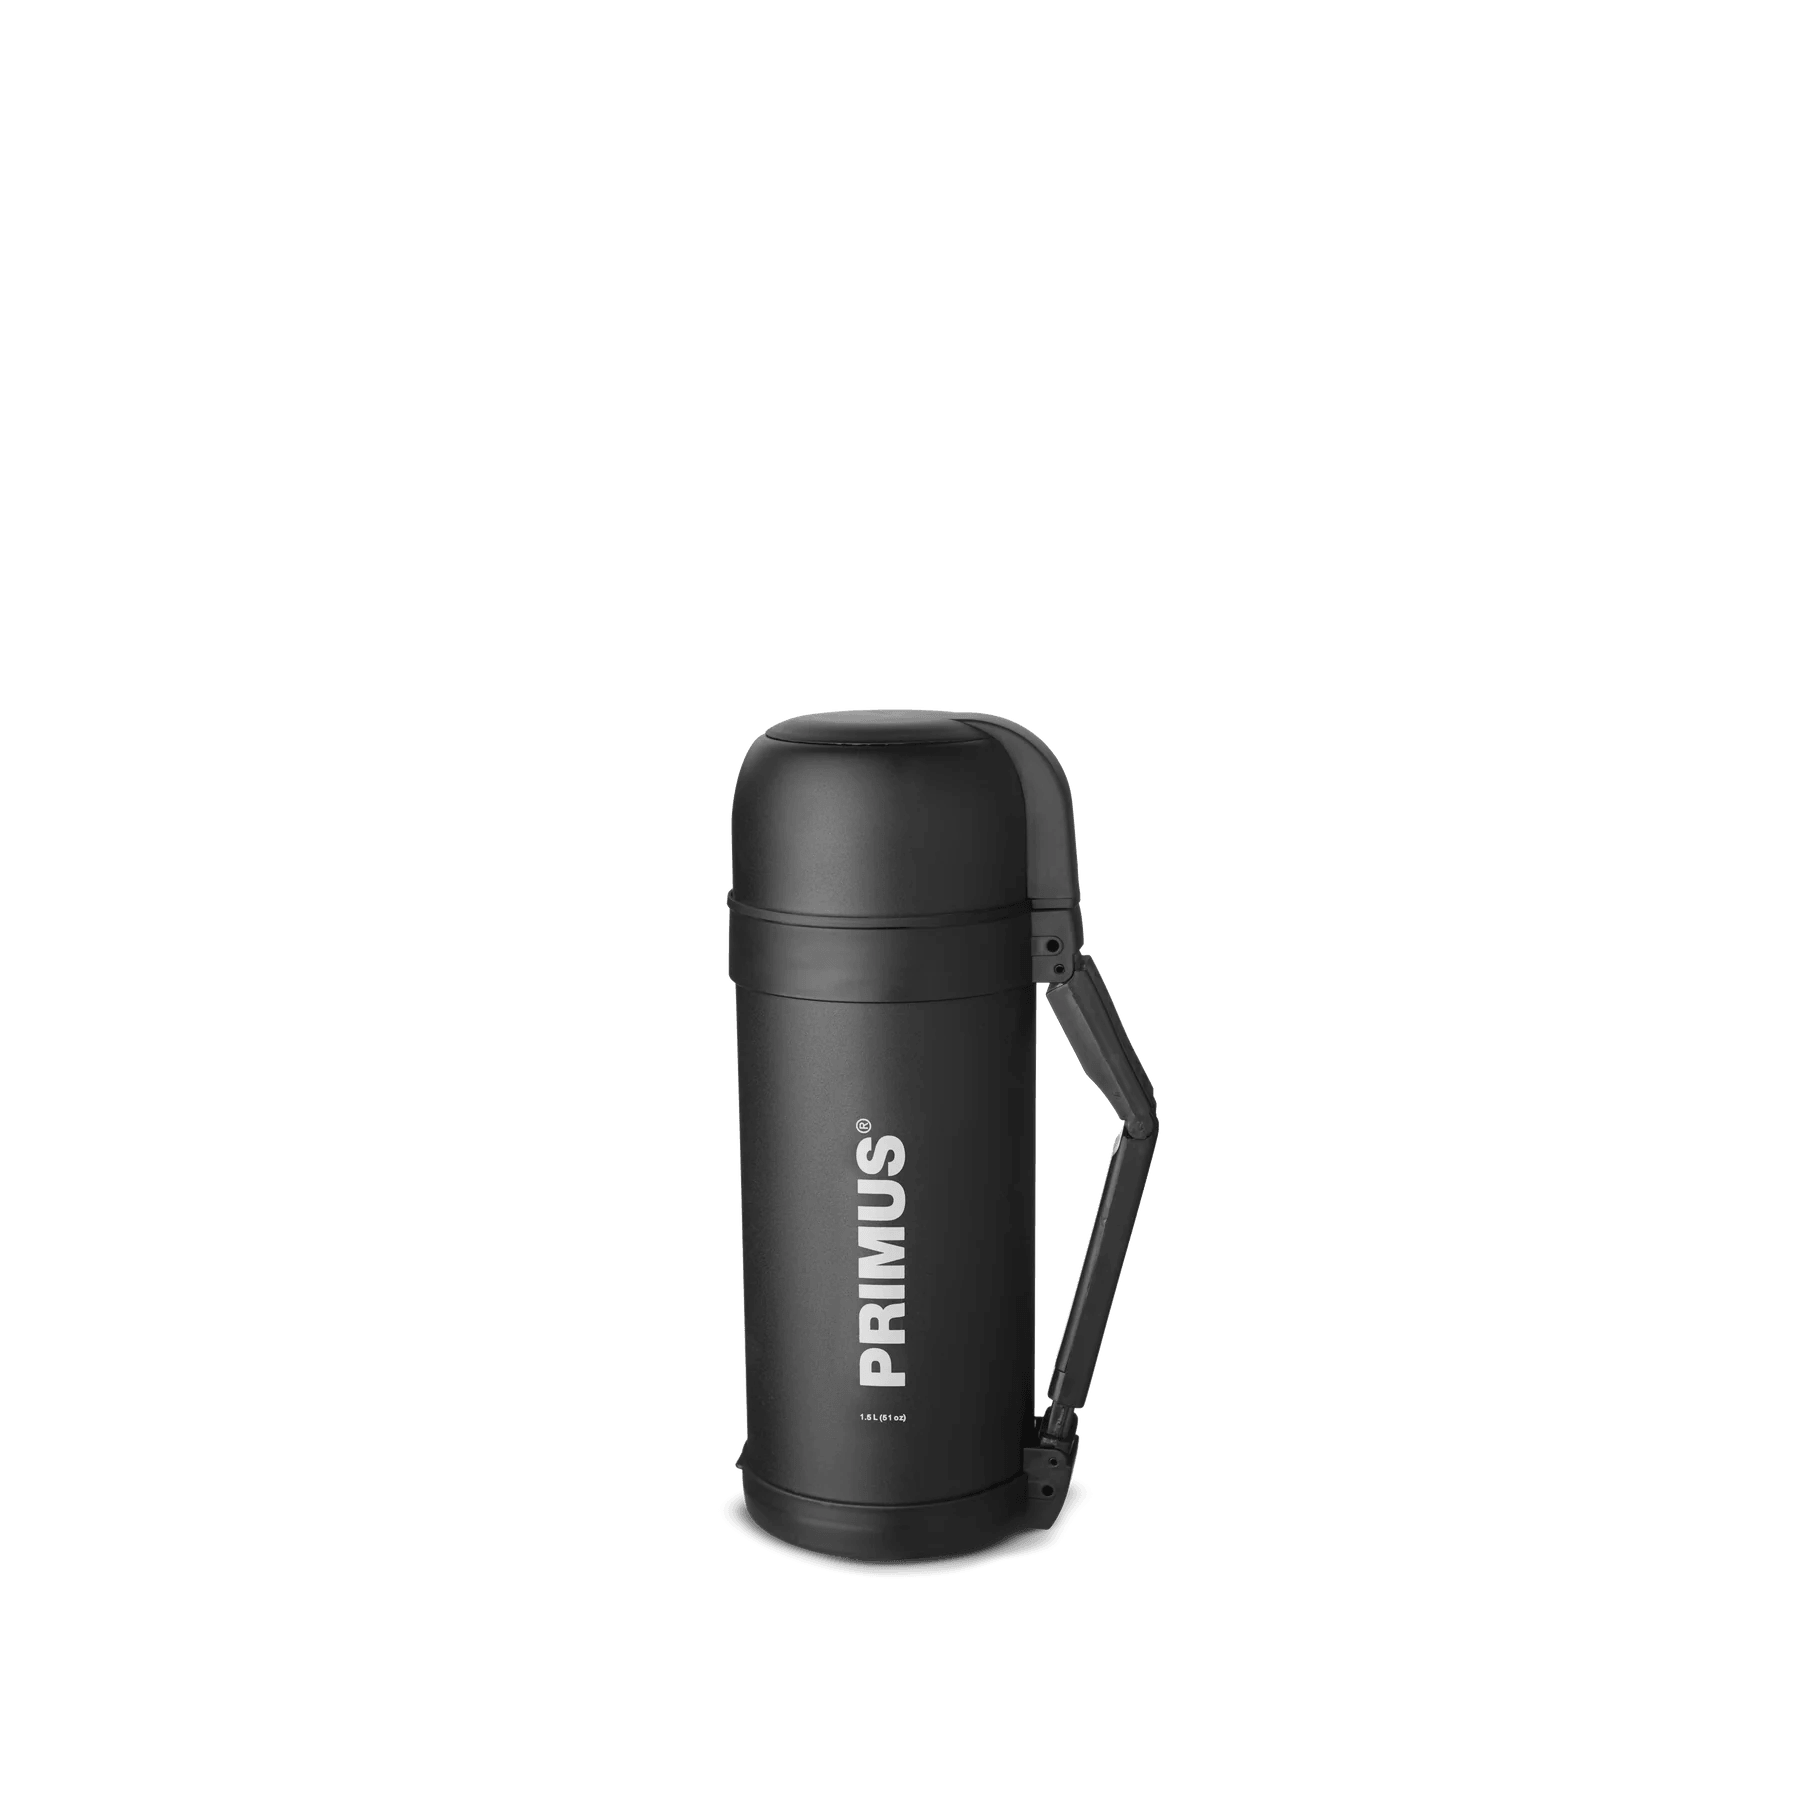 Primus Food Vacuum Bottle 1.2L - Black - Leapfrog Outdoor Sports and Apparel